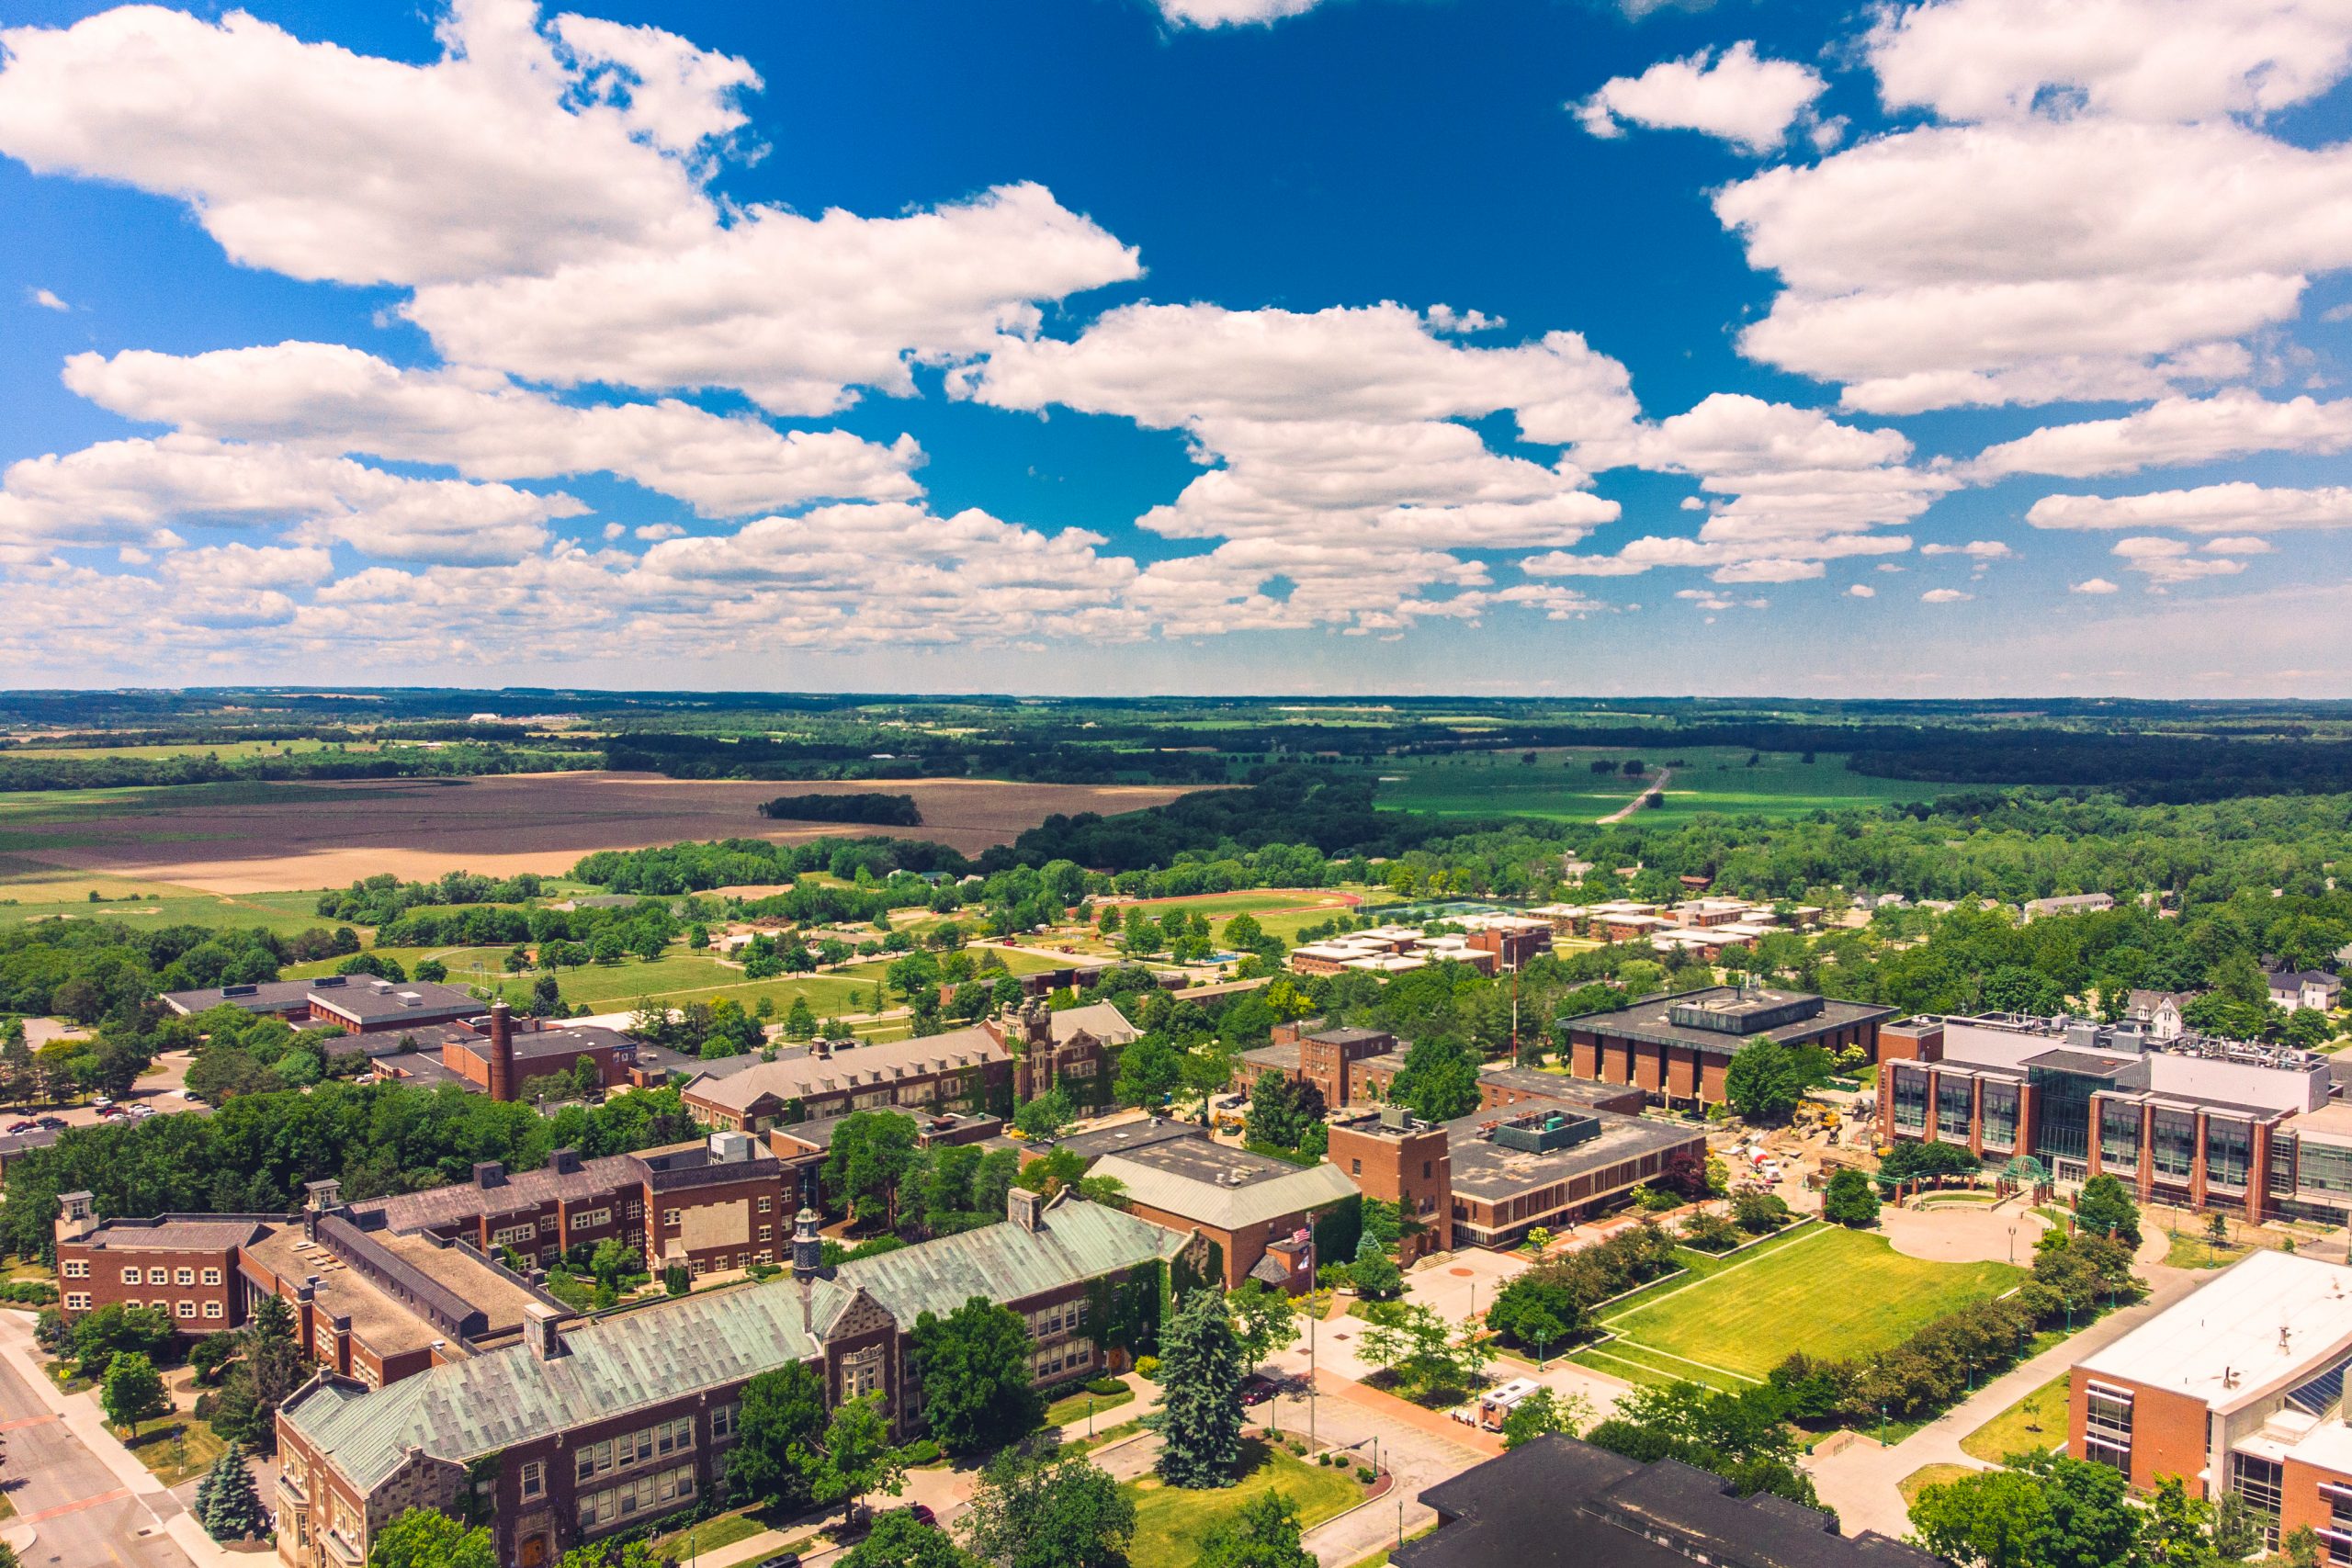 The view over the college and the Genesee Valley on a sunny day.